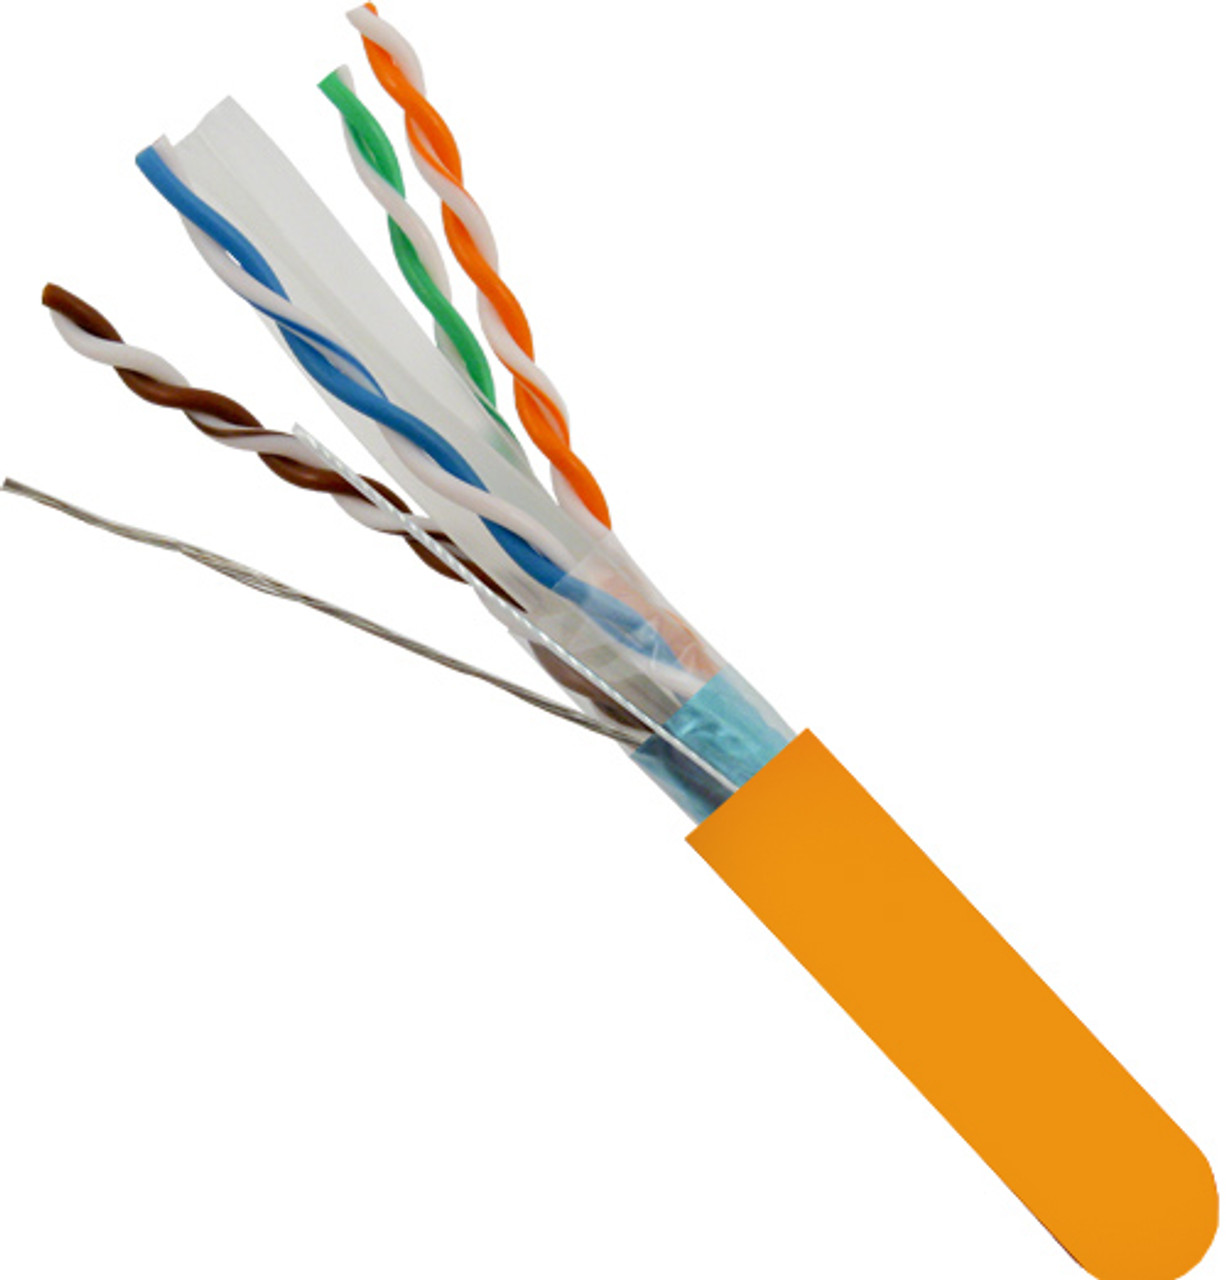 CAT6A (Augmented) 10Gb, Shielded F/UTP , 1000, 8-Conductor, PVC Jacket, AWG23 Solid-Bare Copper, 1000ft Wooden Spool, Orange